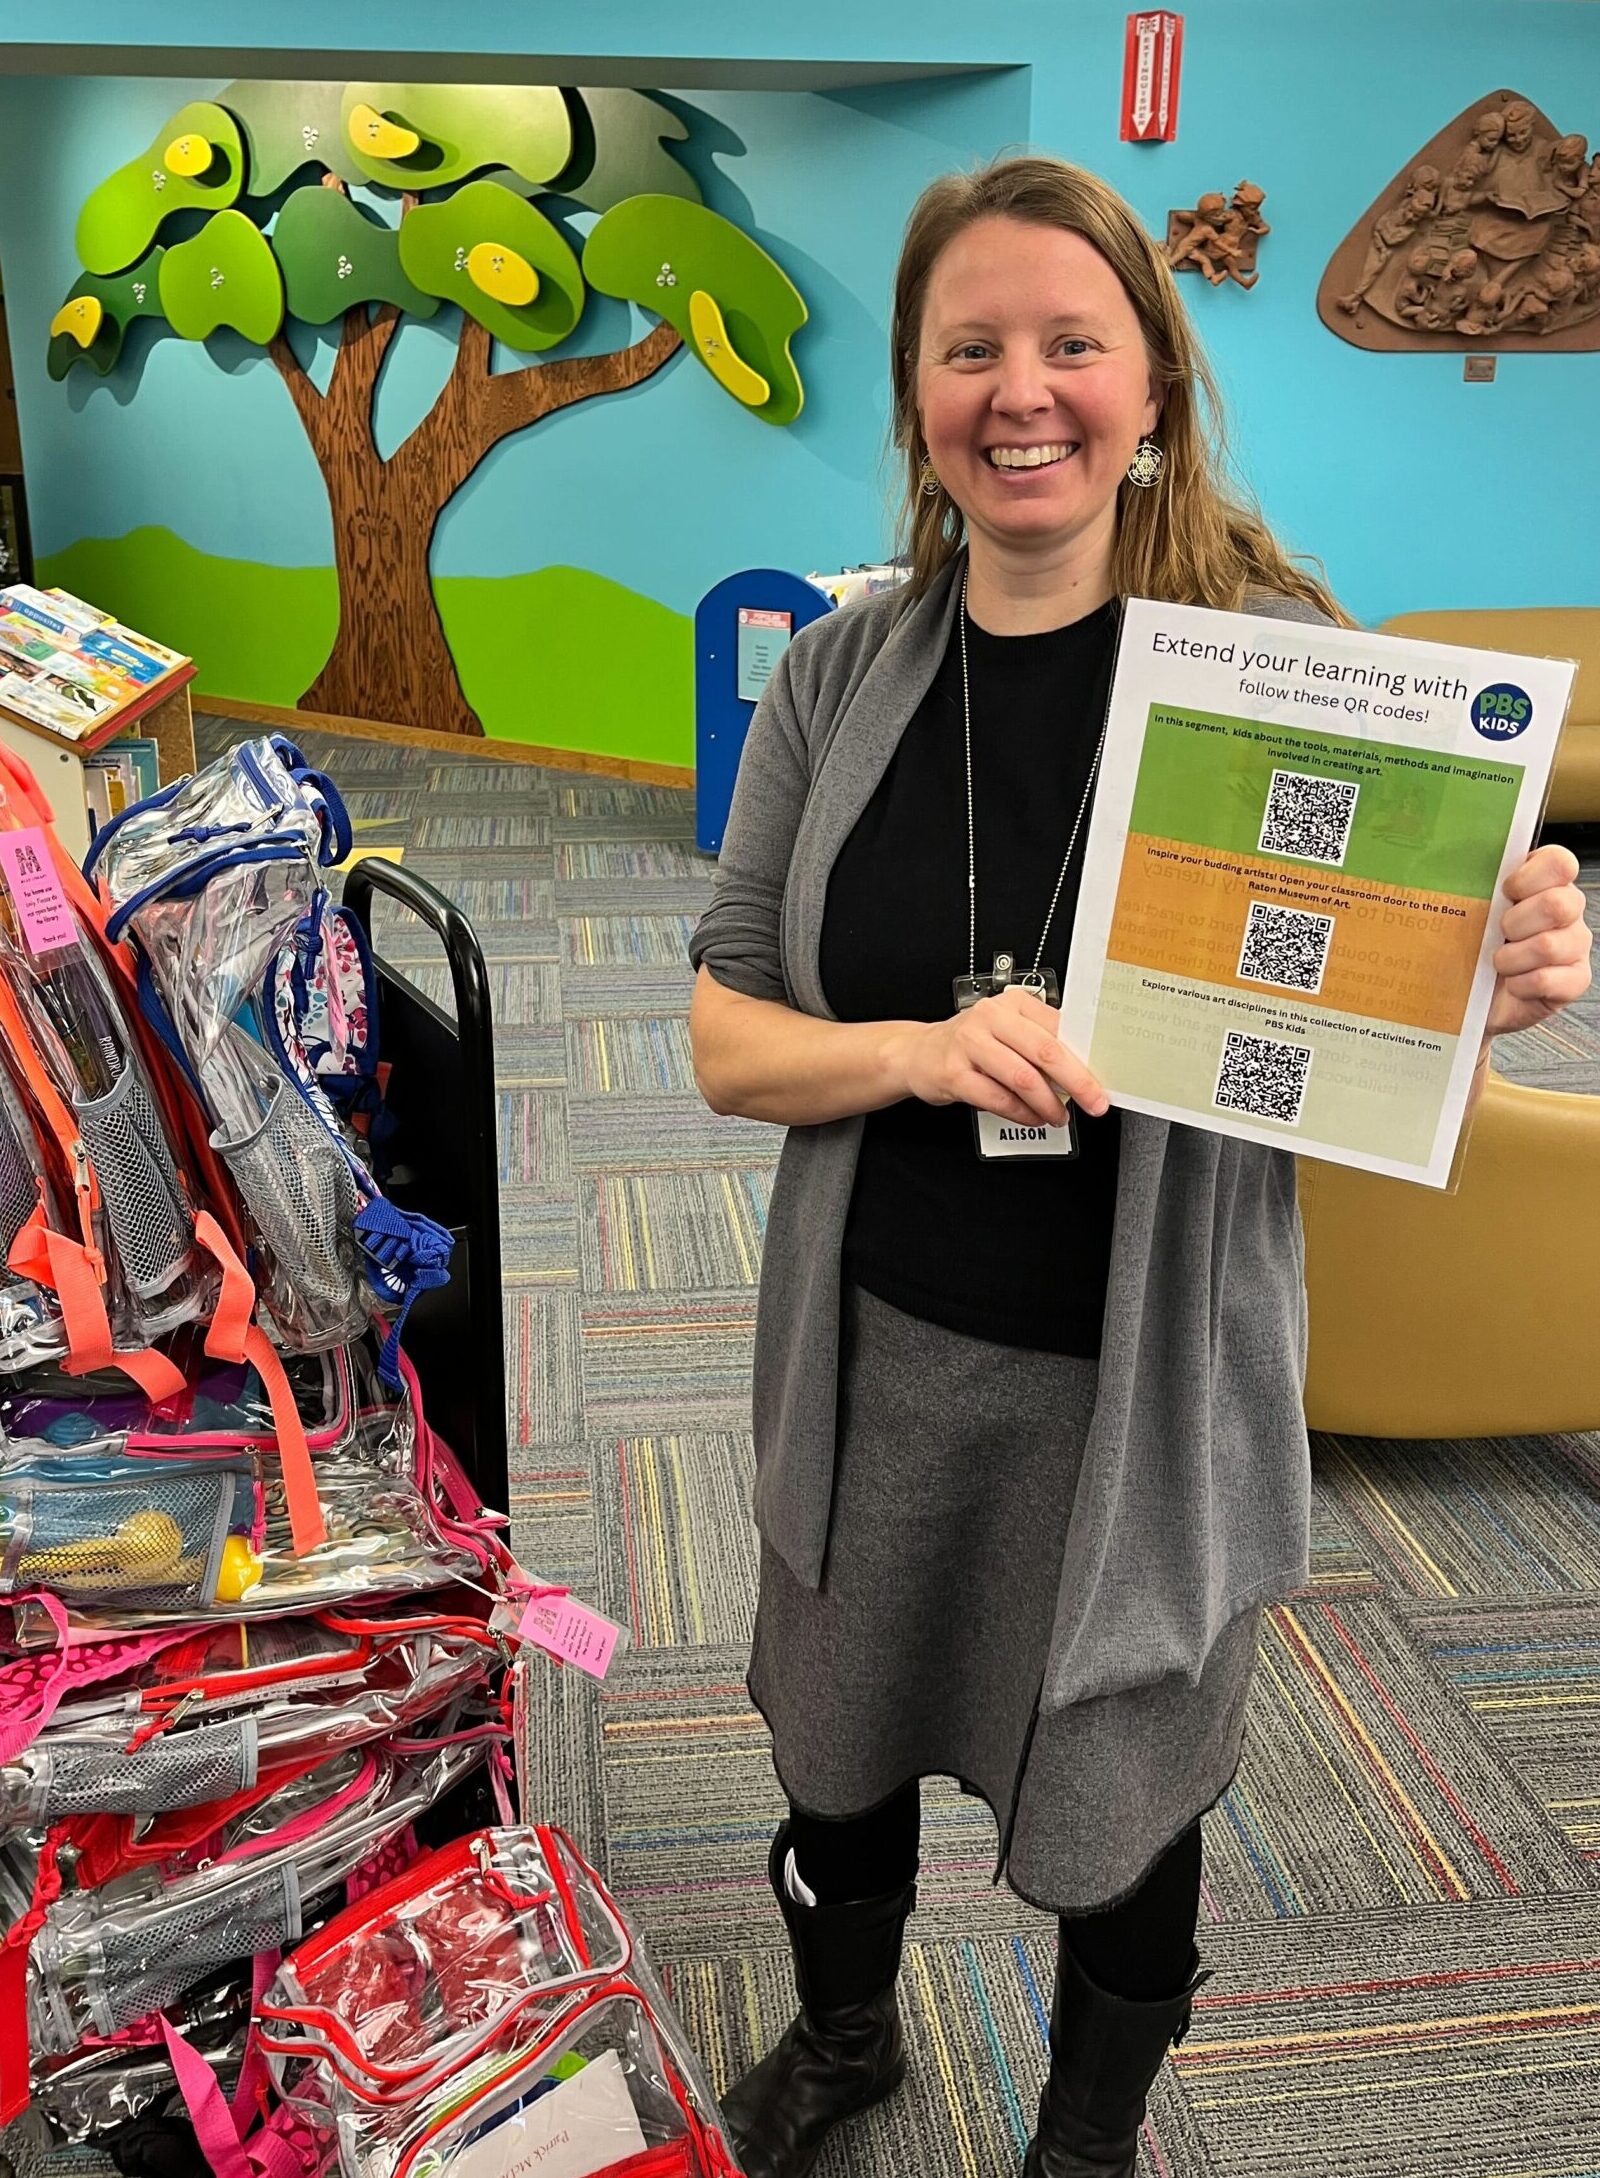 A librarian stands next to a shelf of backpacks and holds up a sheet of paper.